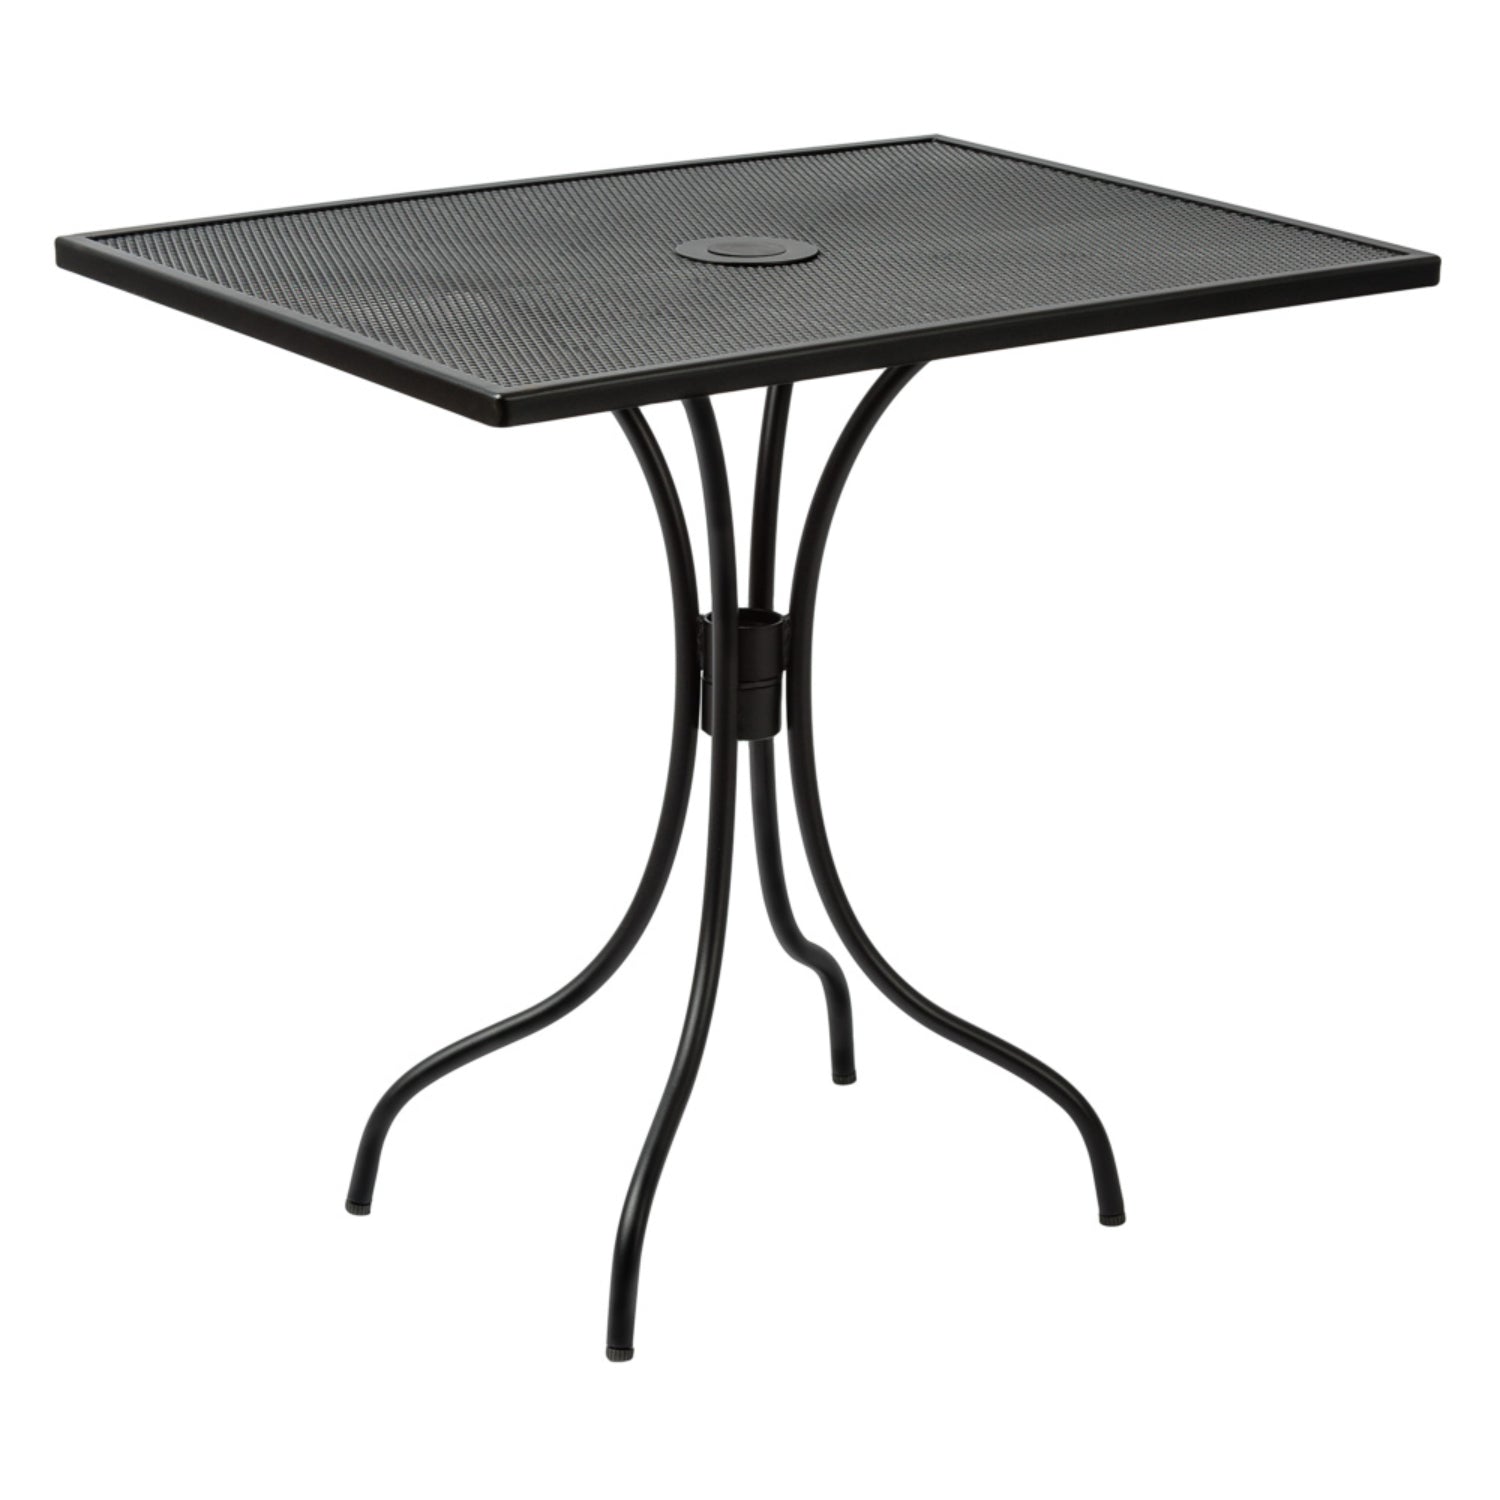 Barnegat Collection Outdoor/Indoor Black Steel 24" x 32" Dining Height Table with Umbrella Hole